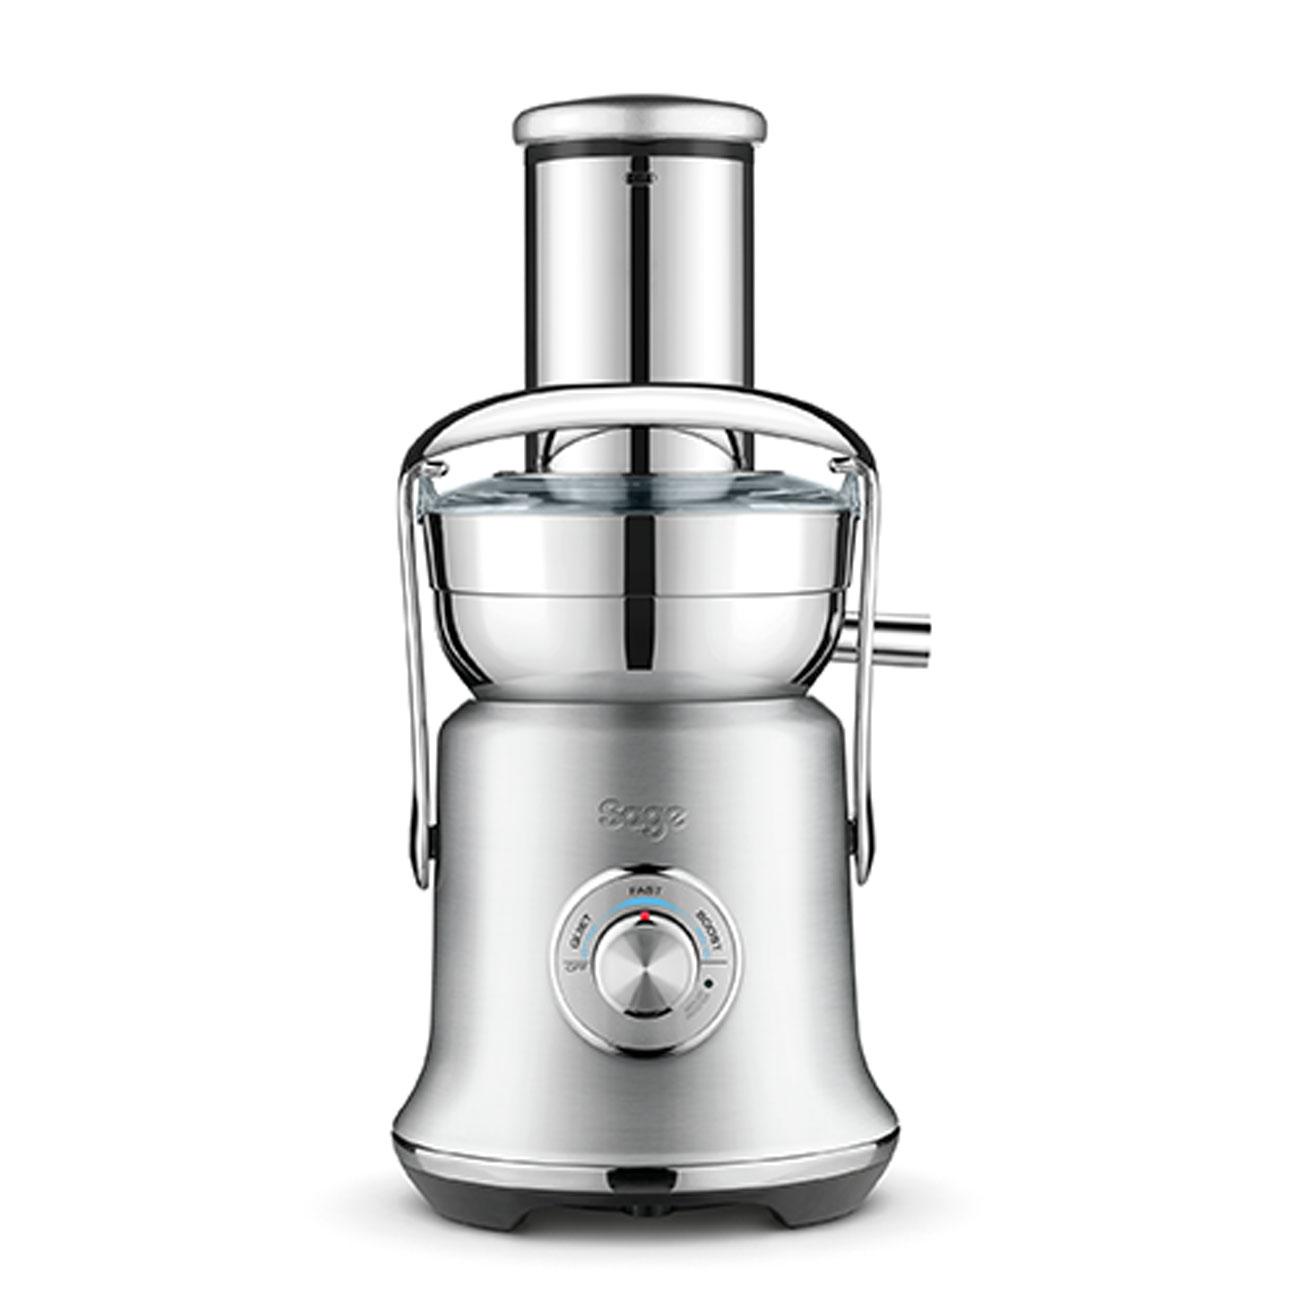 the Nutri Juicer® Cold XL